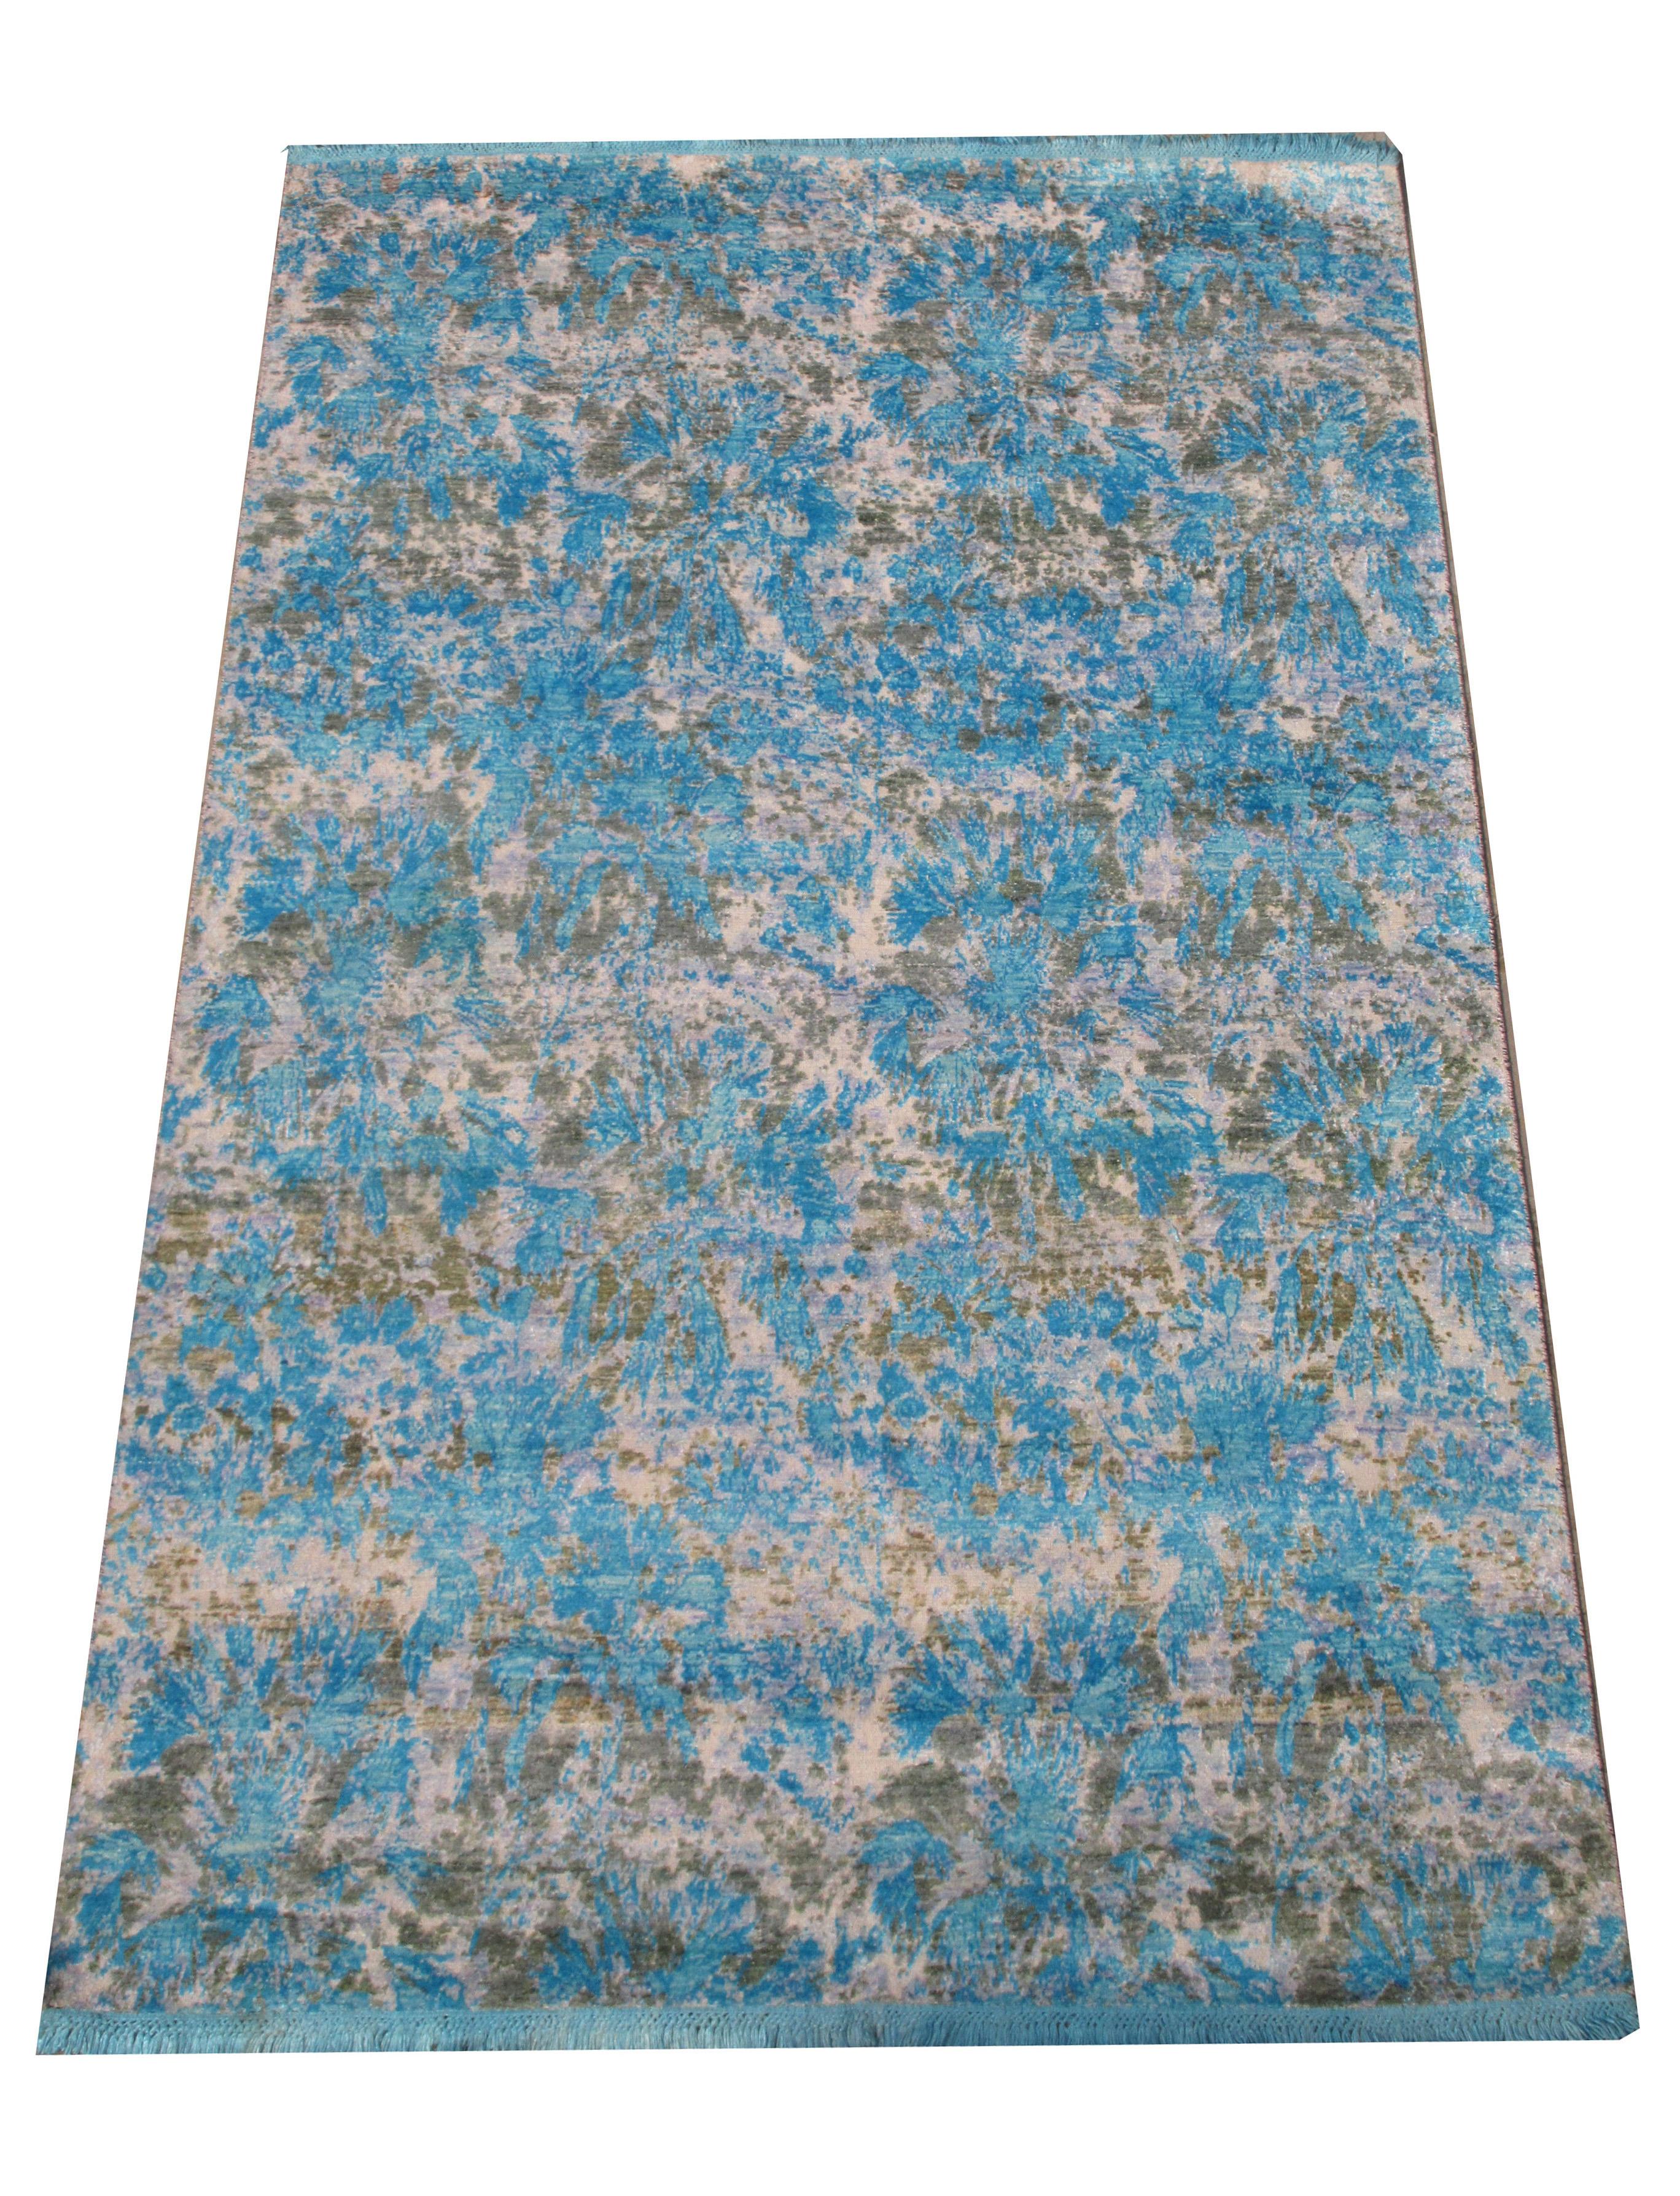 Hand knotted wool & silk pile on a cotton foundation. 

Oxidized design.

Dimensions: 7'10